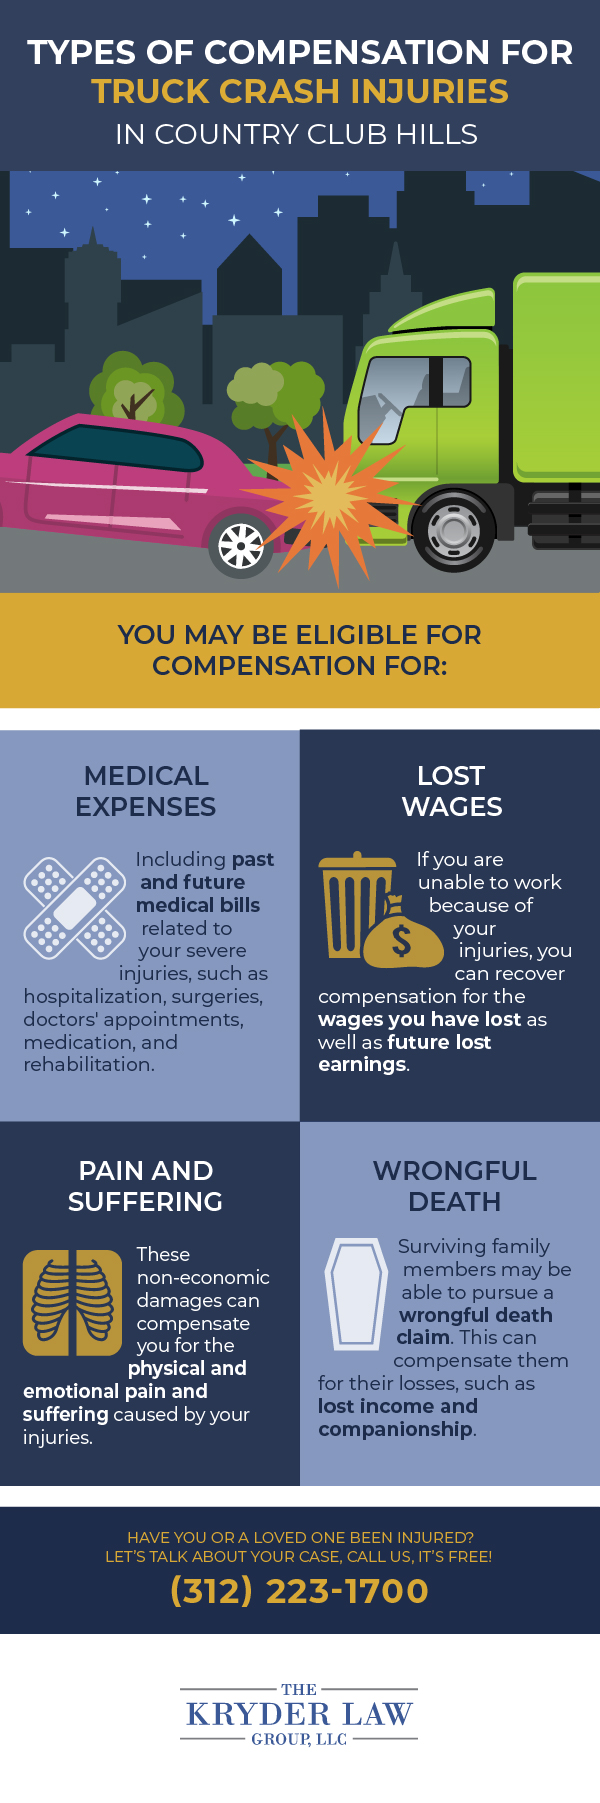 Types of Compensation for Truck Crash Injuries in Country Club Hills Infographic